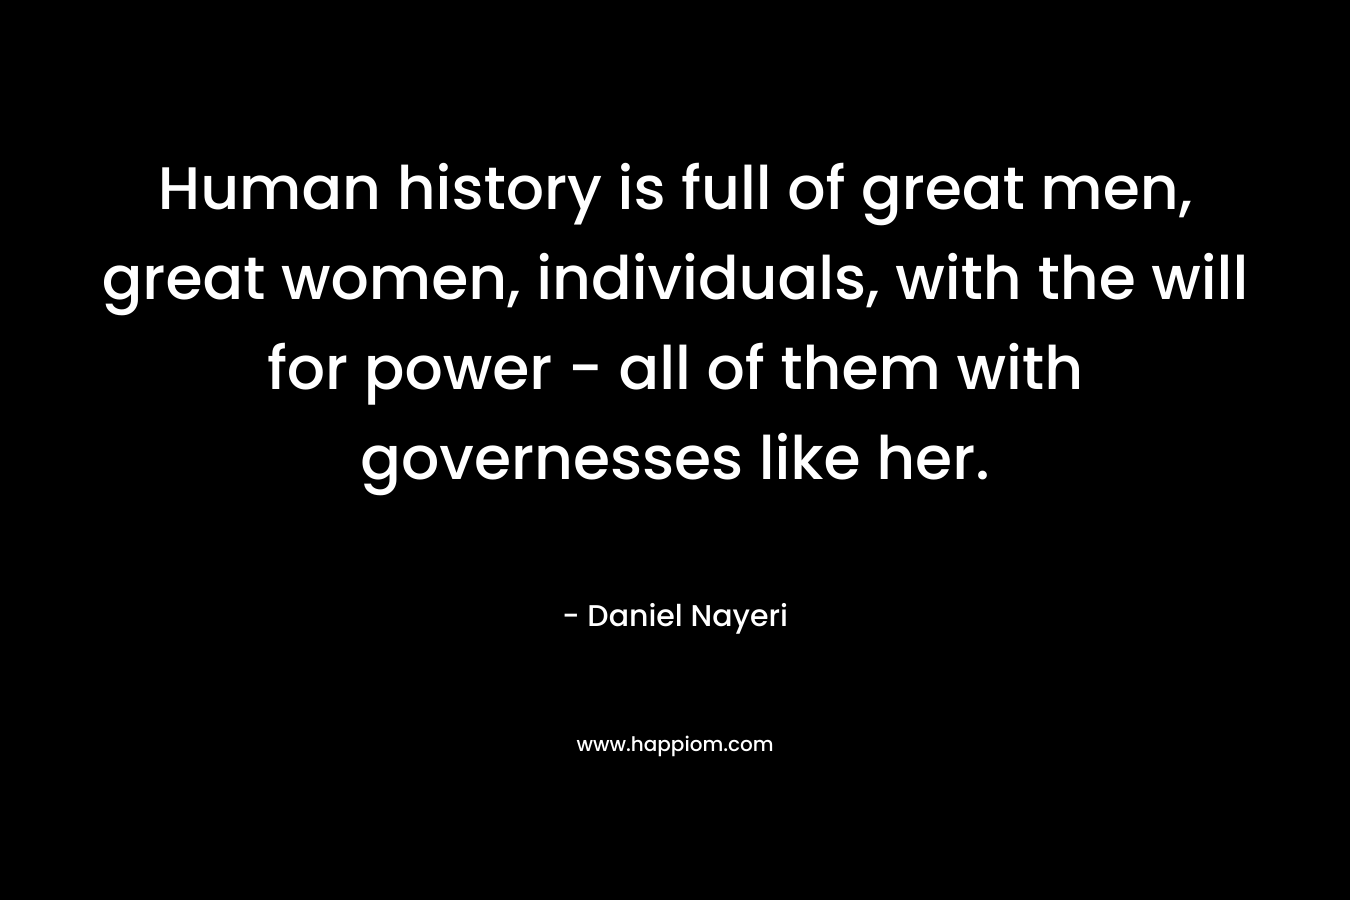 Human history is full of great men, great women, individuals, with the will for power – all of them with governesses like her. – Daniel Nayeri